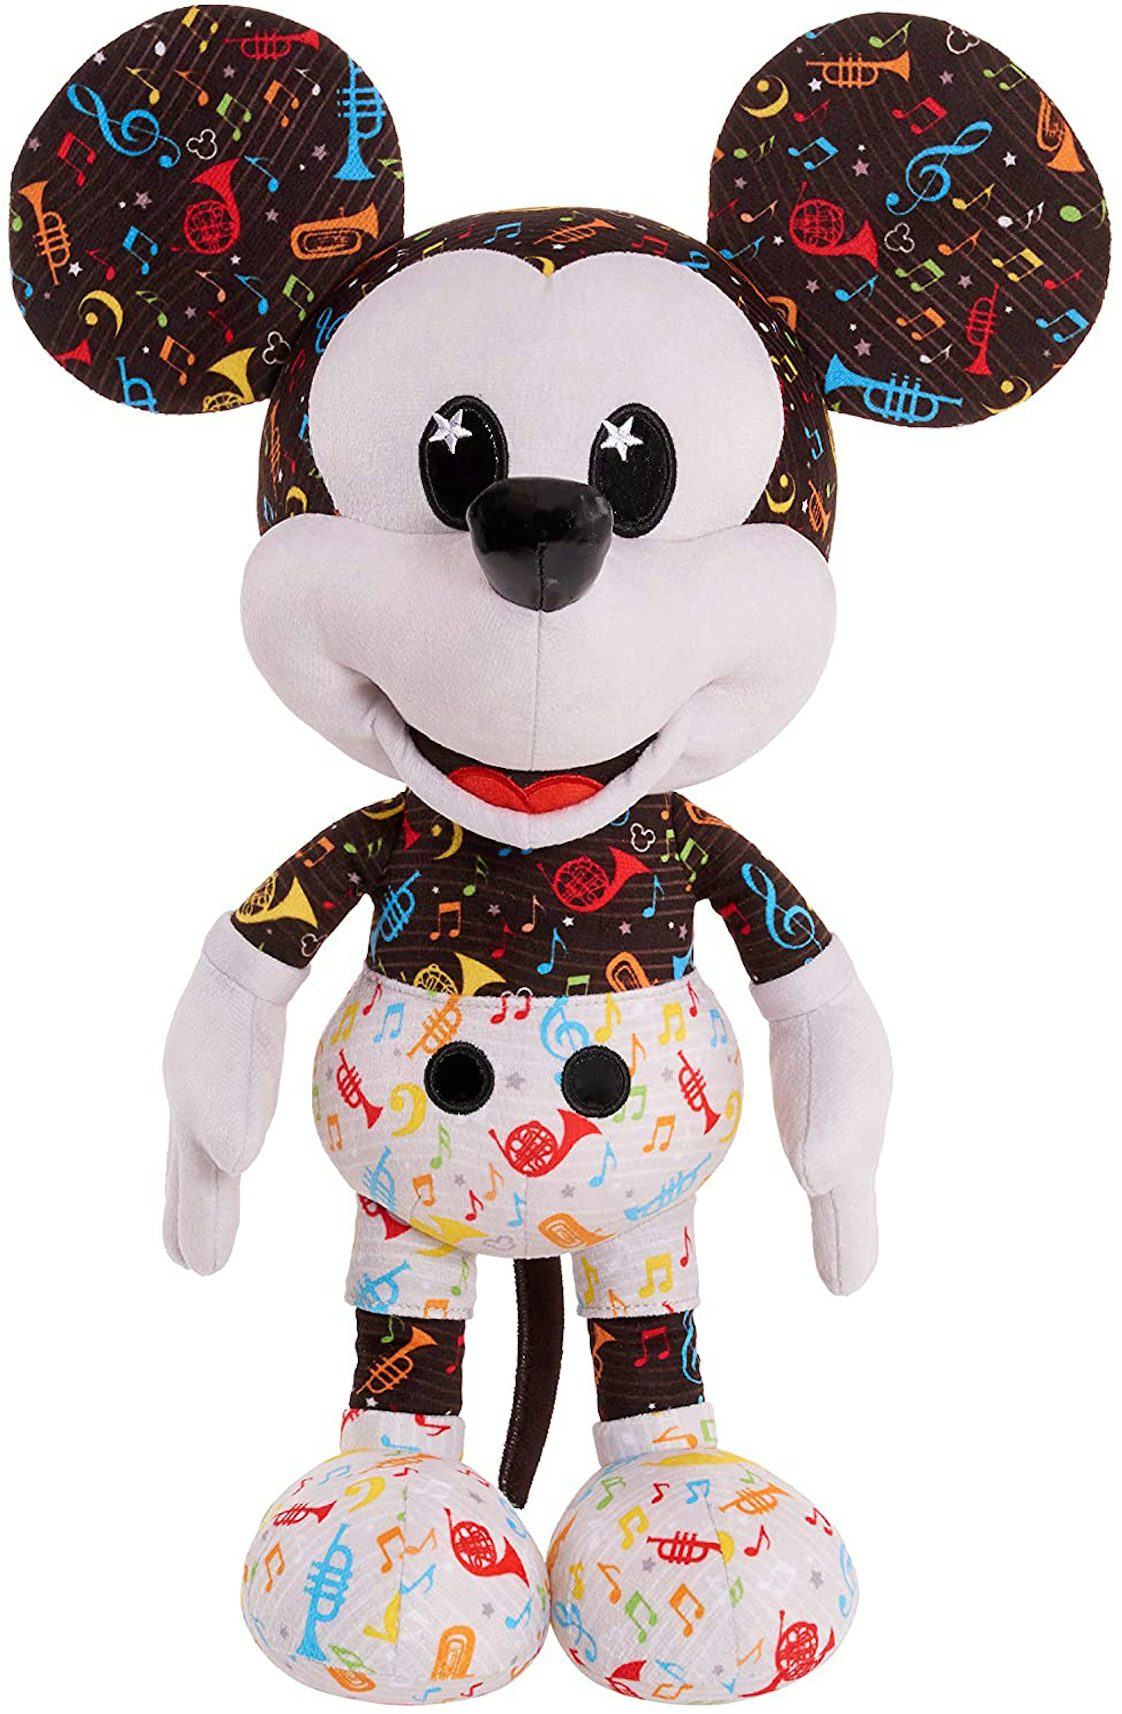 Disney Year Of the Mouse Animator Mickey Mouse September Plush Beige - US